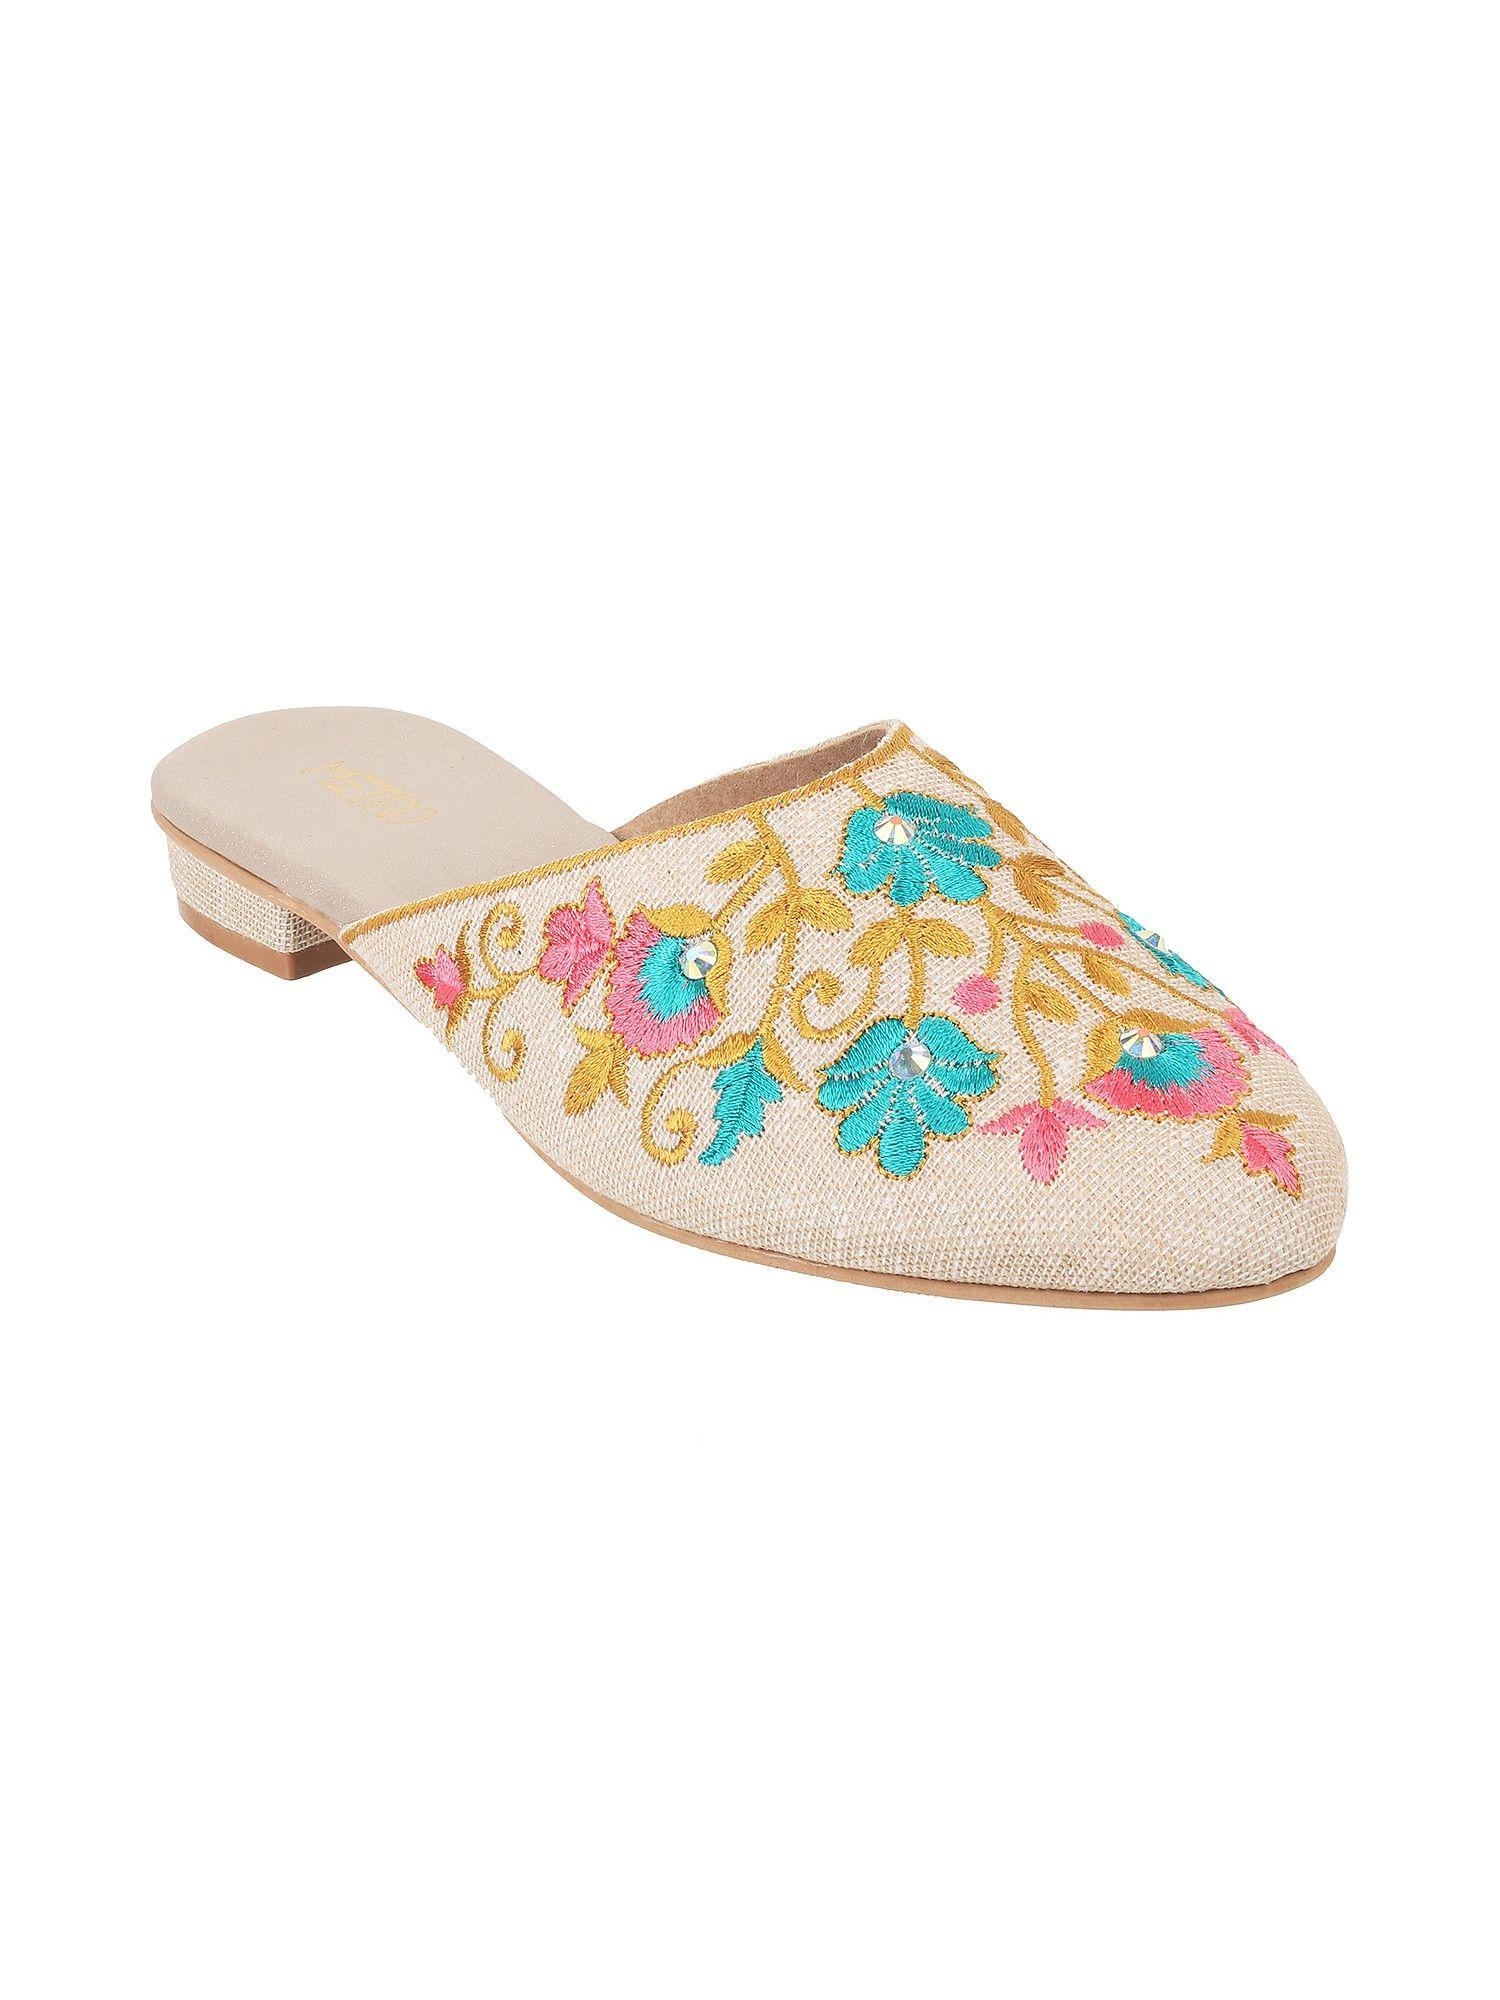 womens beige mules metro beige beaded embroidered women mules